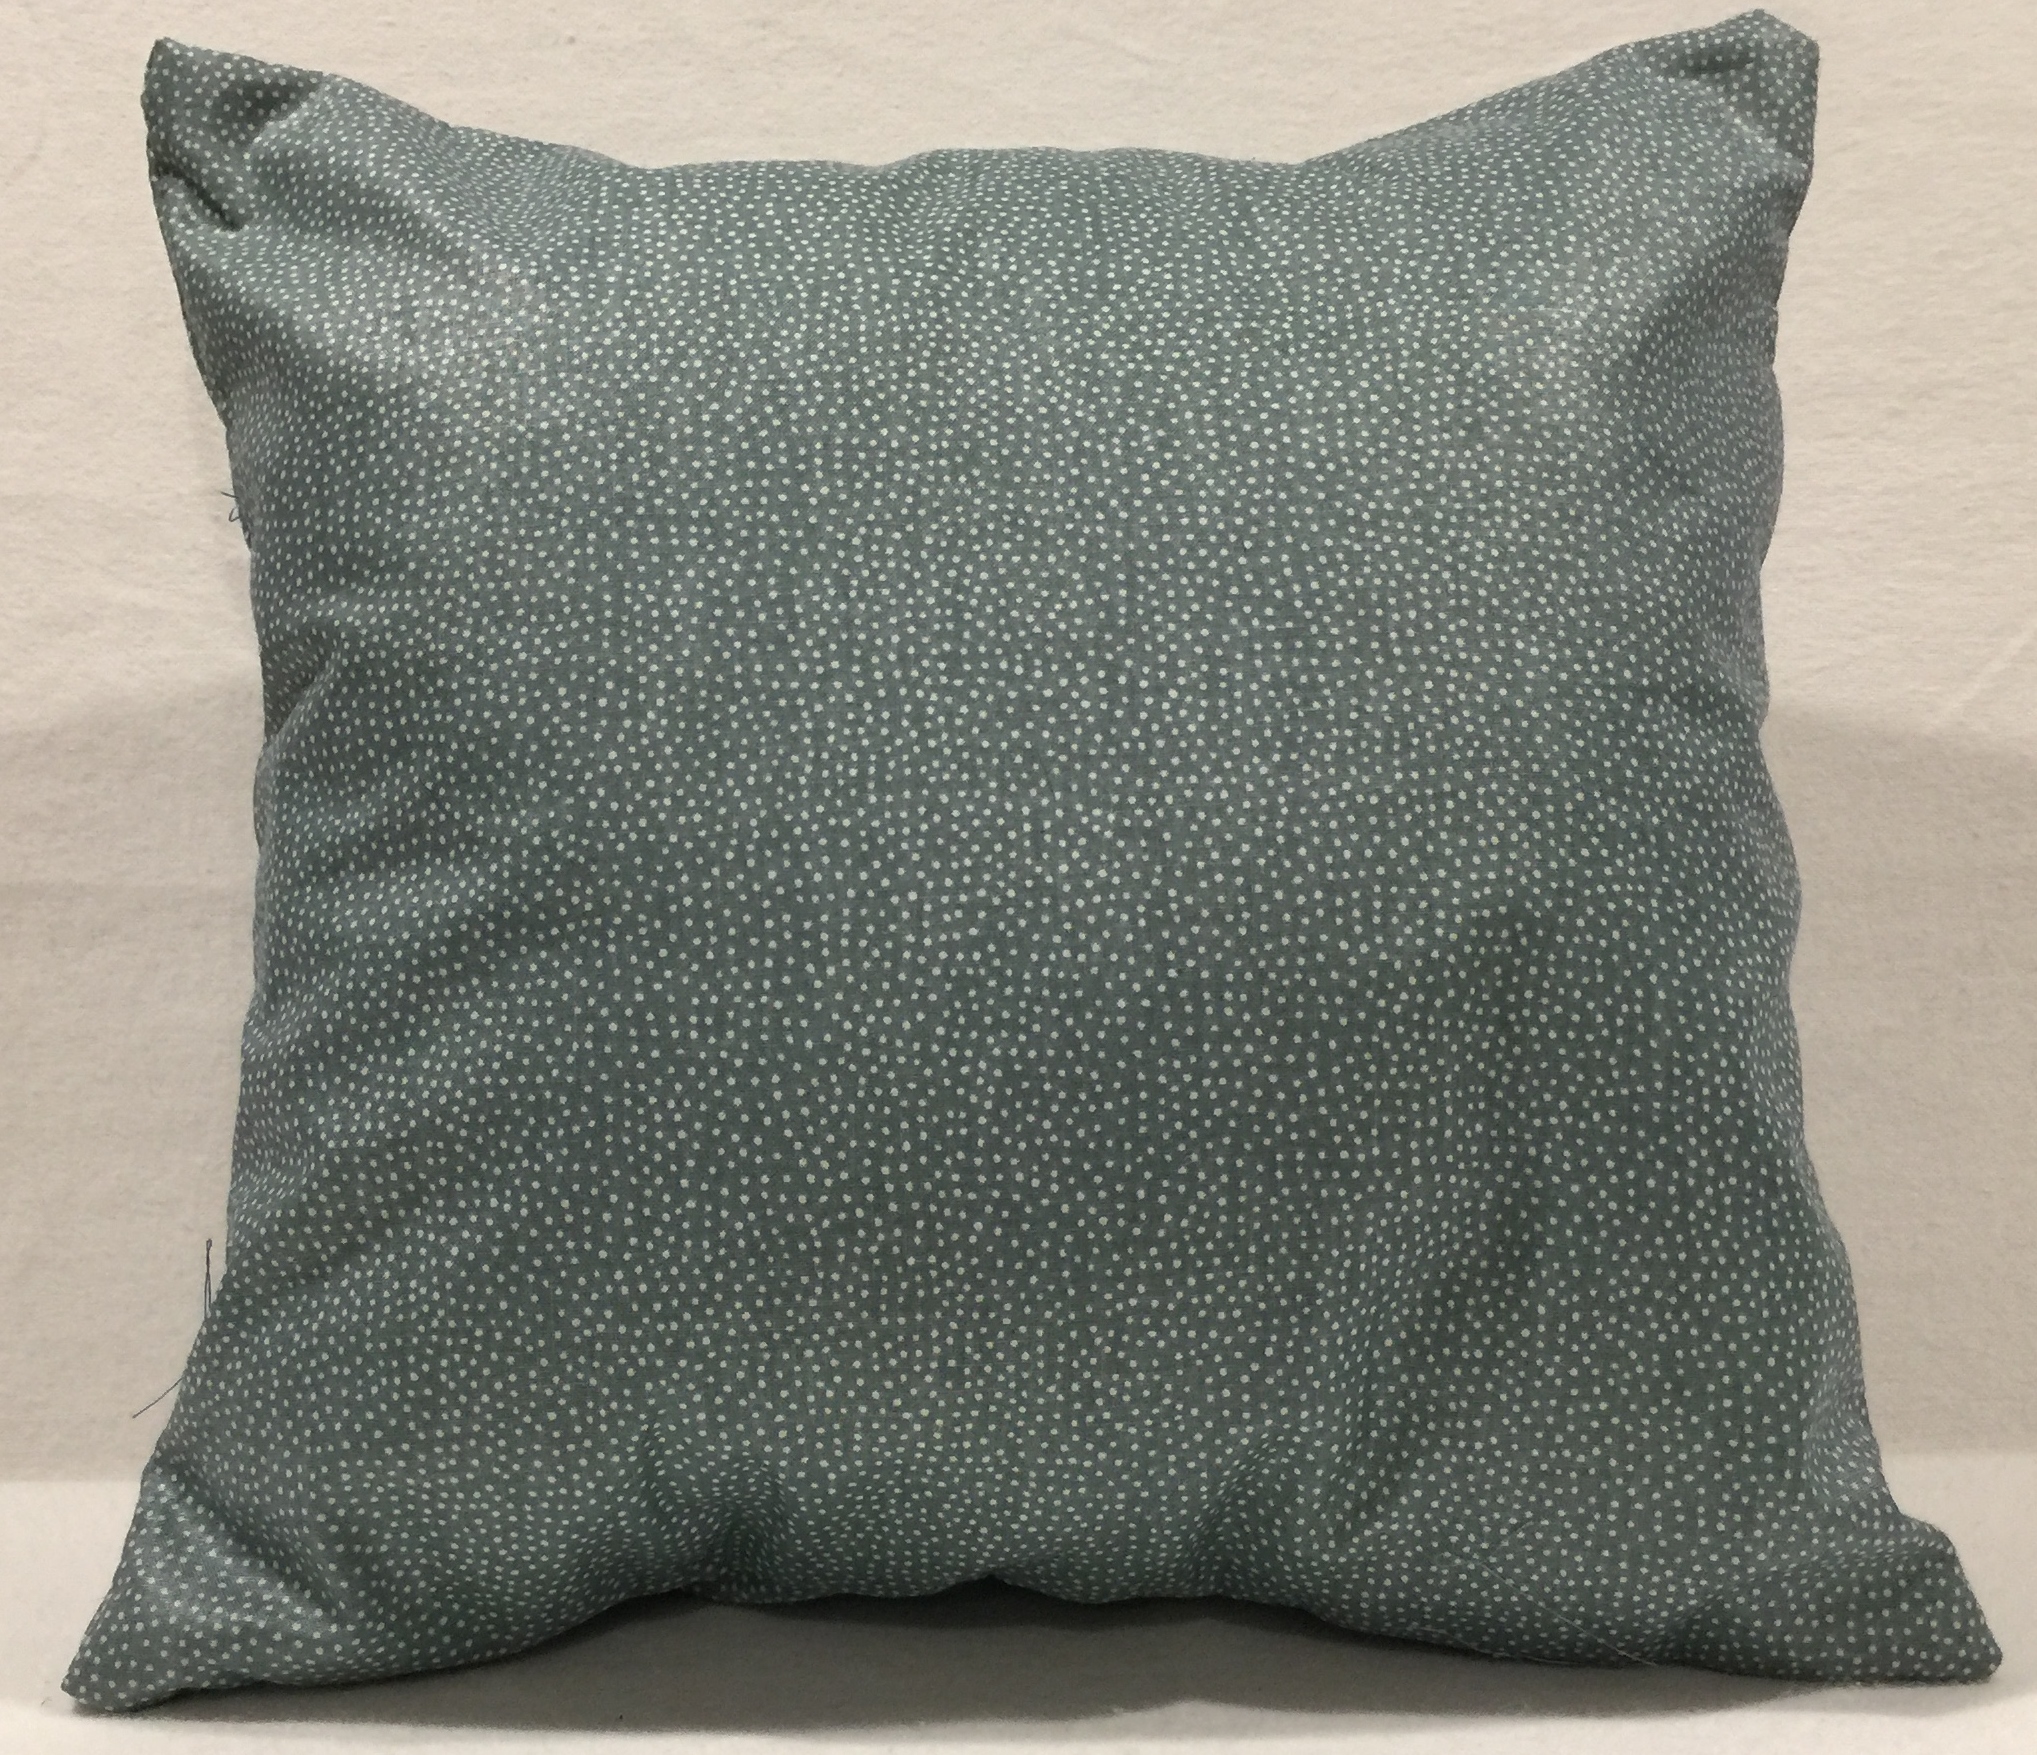 Fleece 13″ Pillow Project WITH FLEECE RIBBON AND PLASTIC NEEDLE - Choose From Fabric Options, includes Pillow Insert